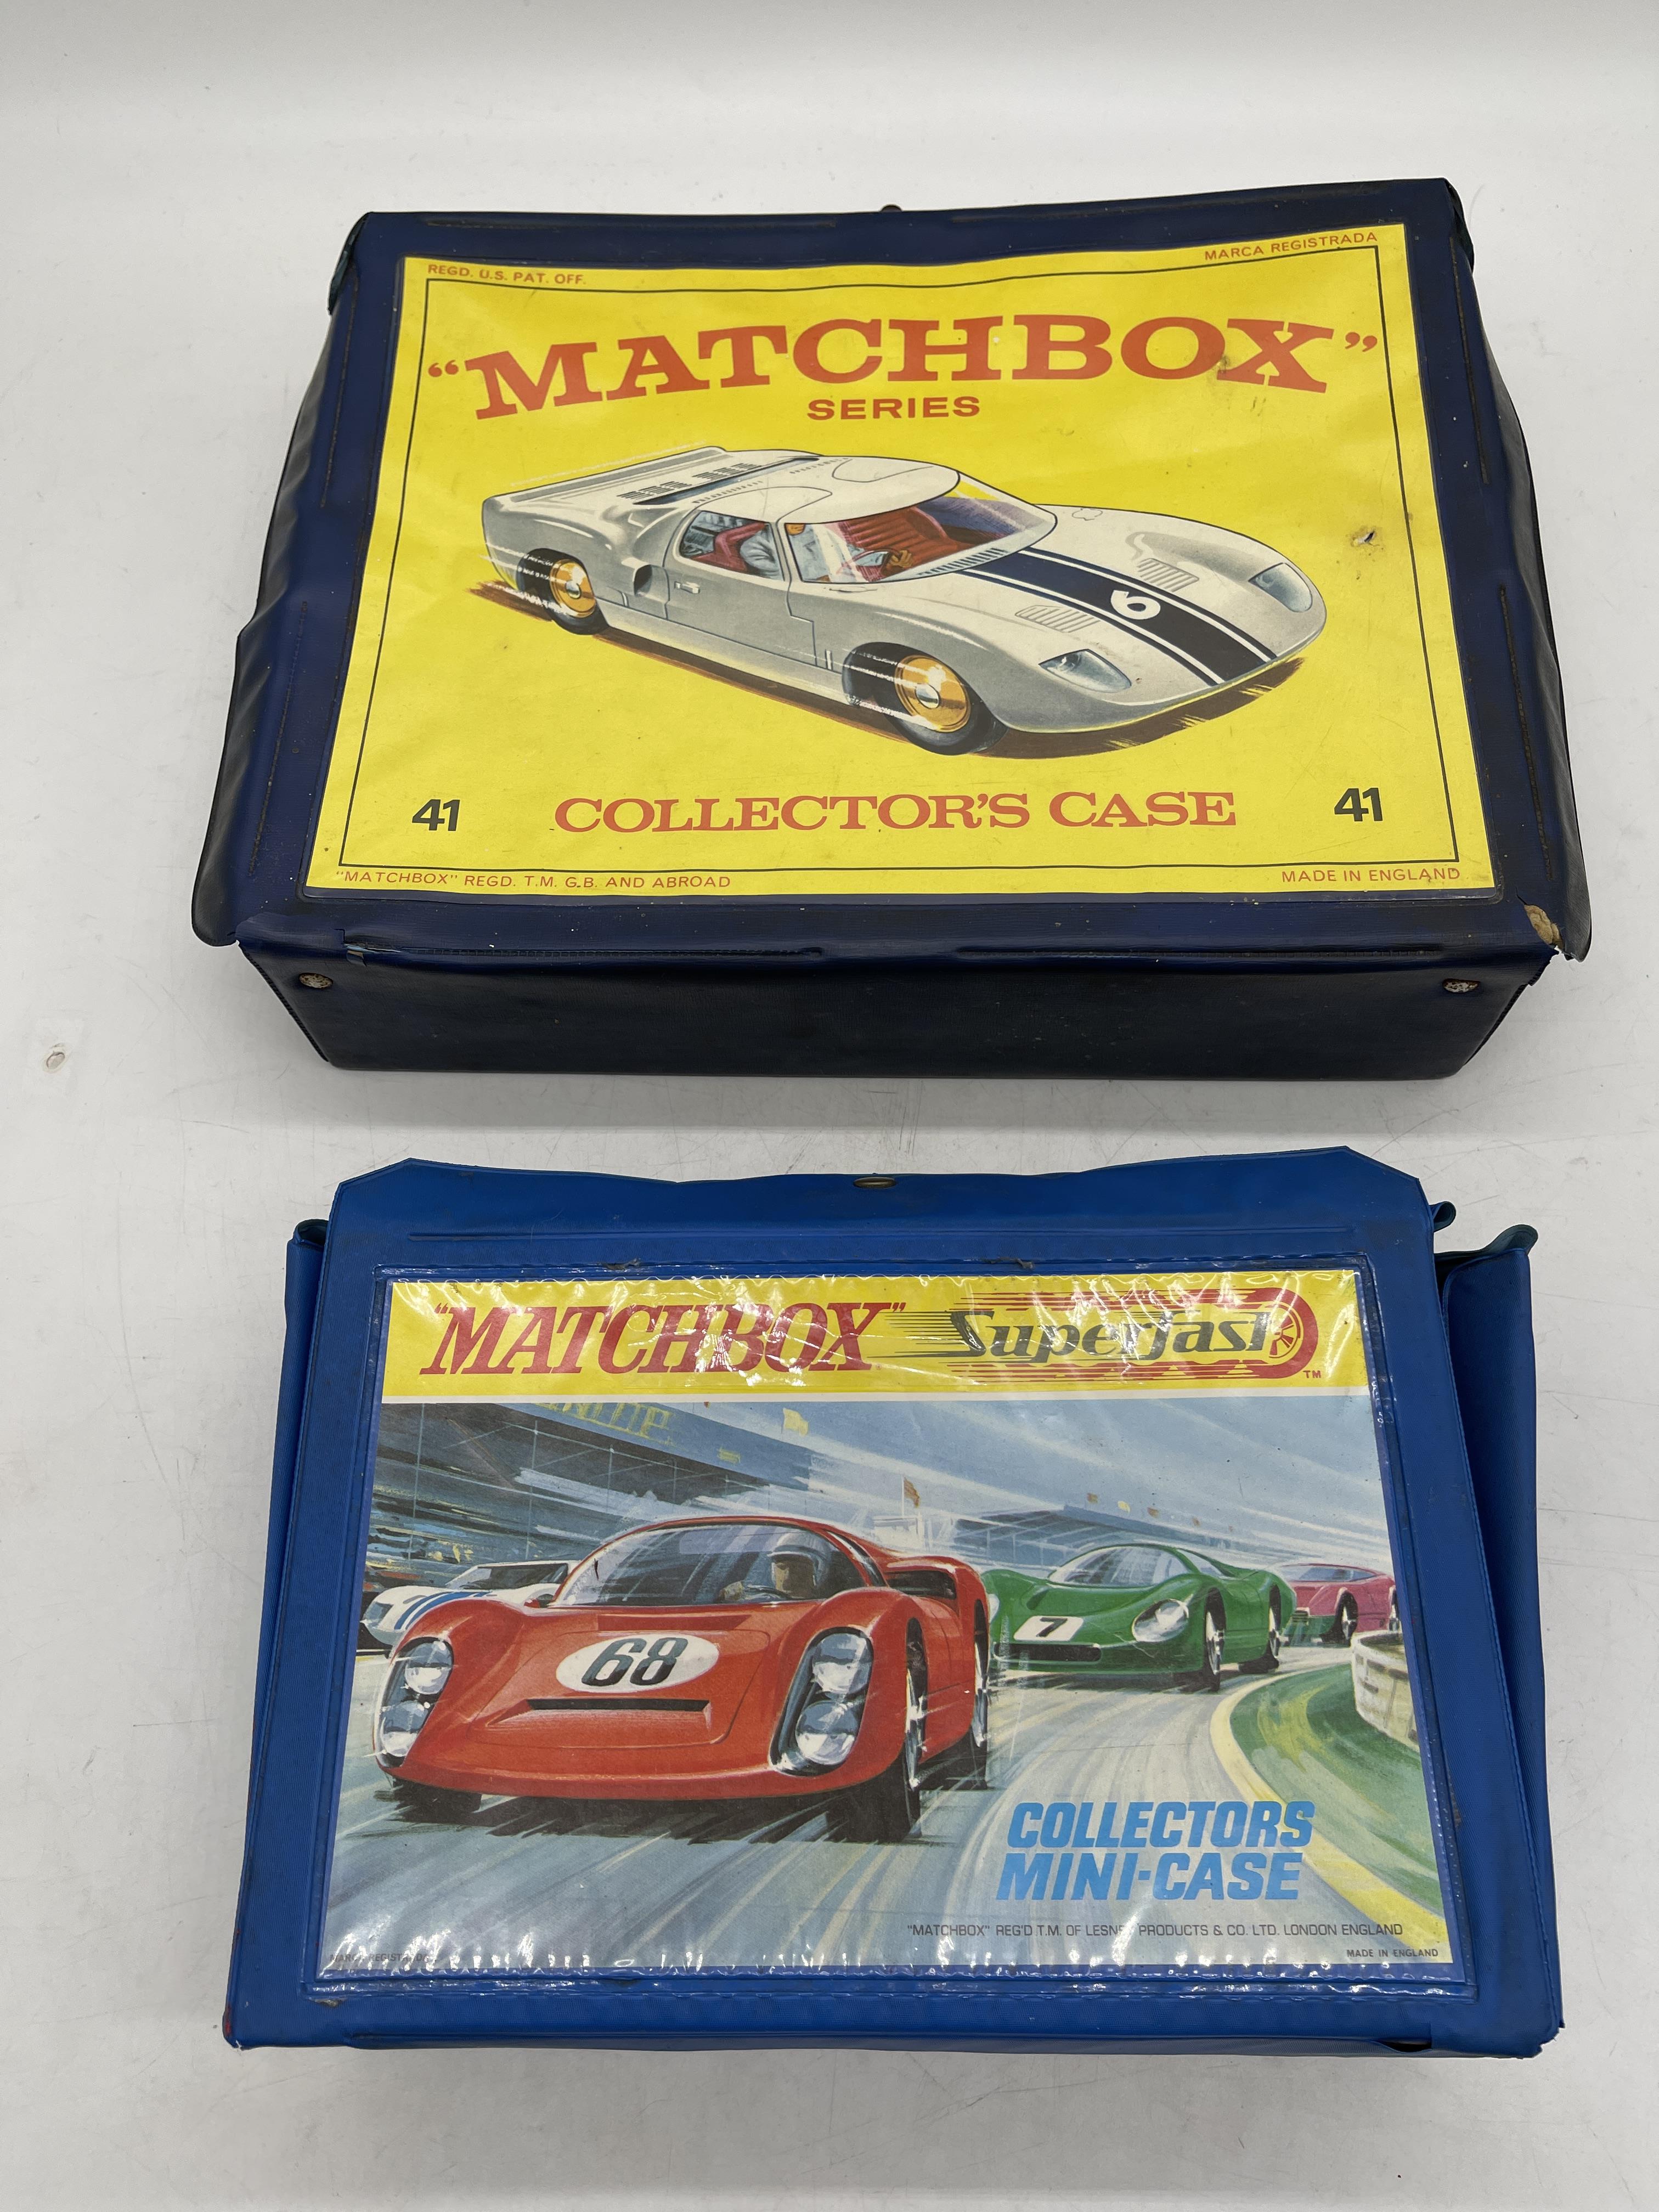 Two boxes of vintage play-worn vehicles